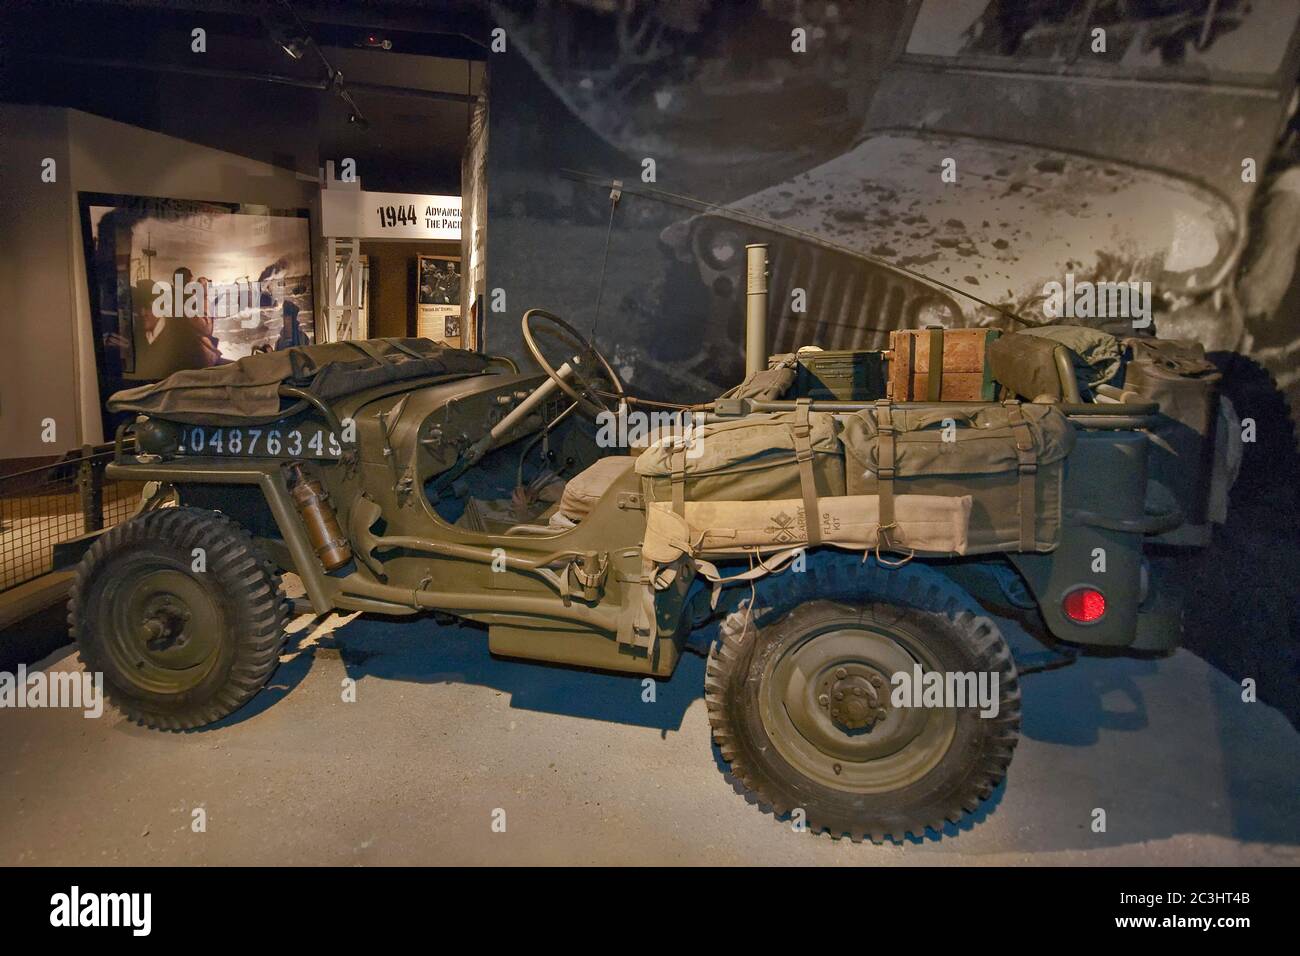 WW2 Jeep displayed at George H W Bush Gallery at National Museum of the Pacific War in Fredericksburg, Texas, USA Stock Photo